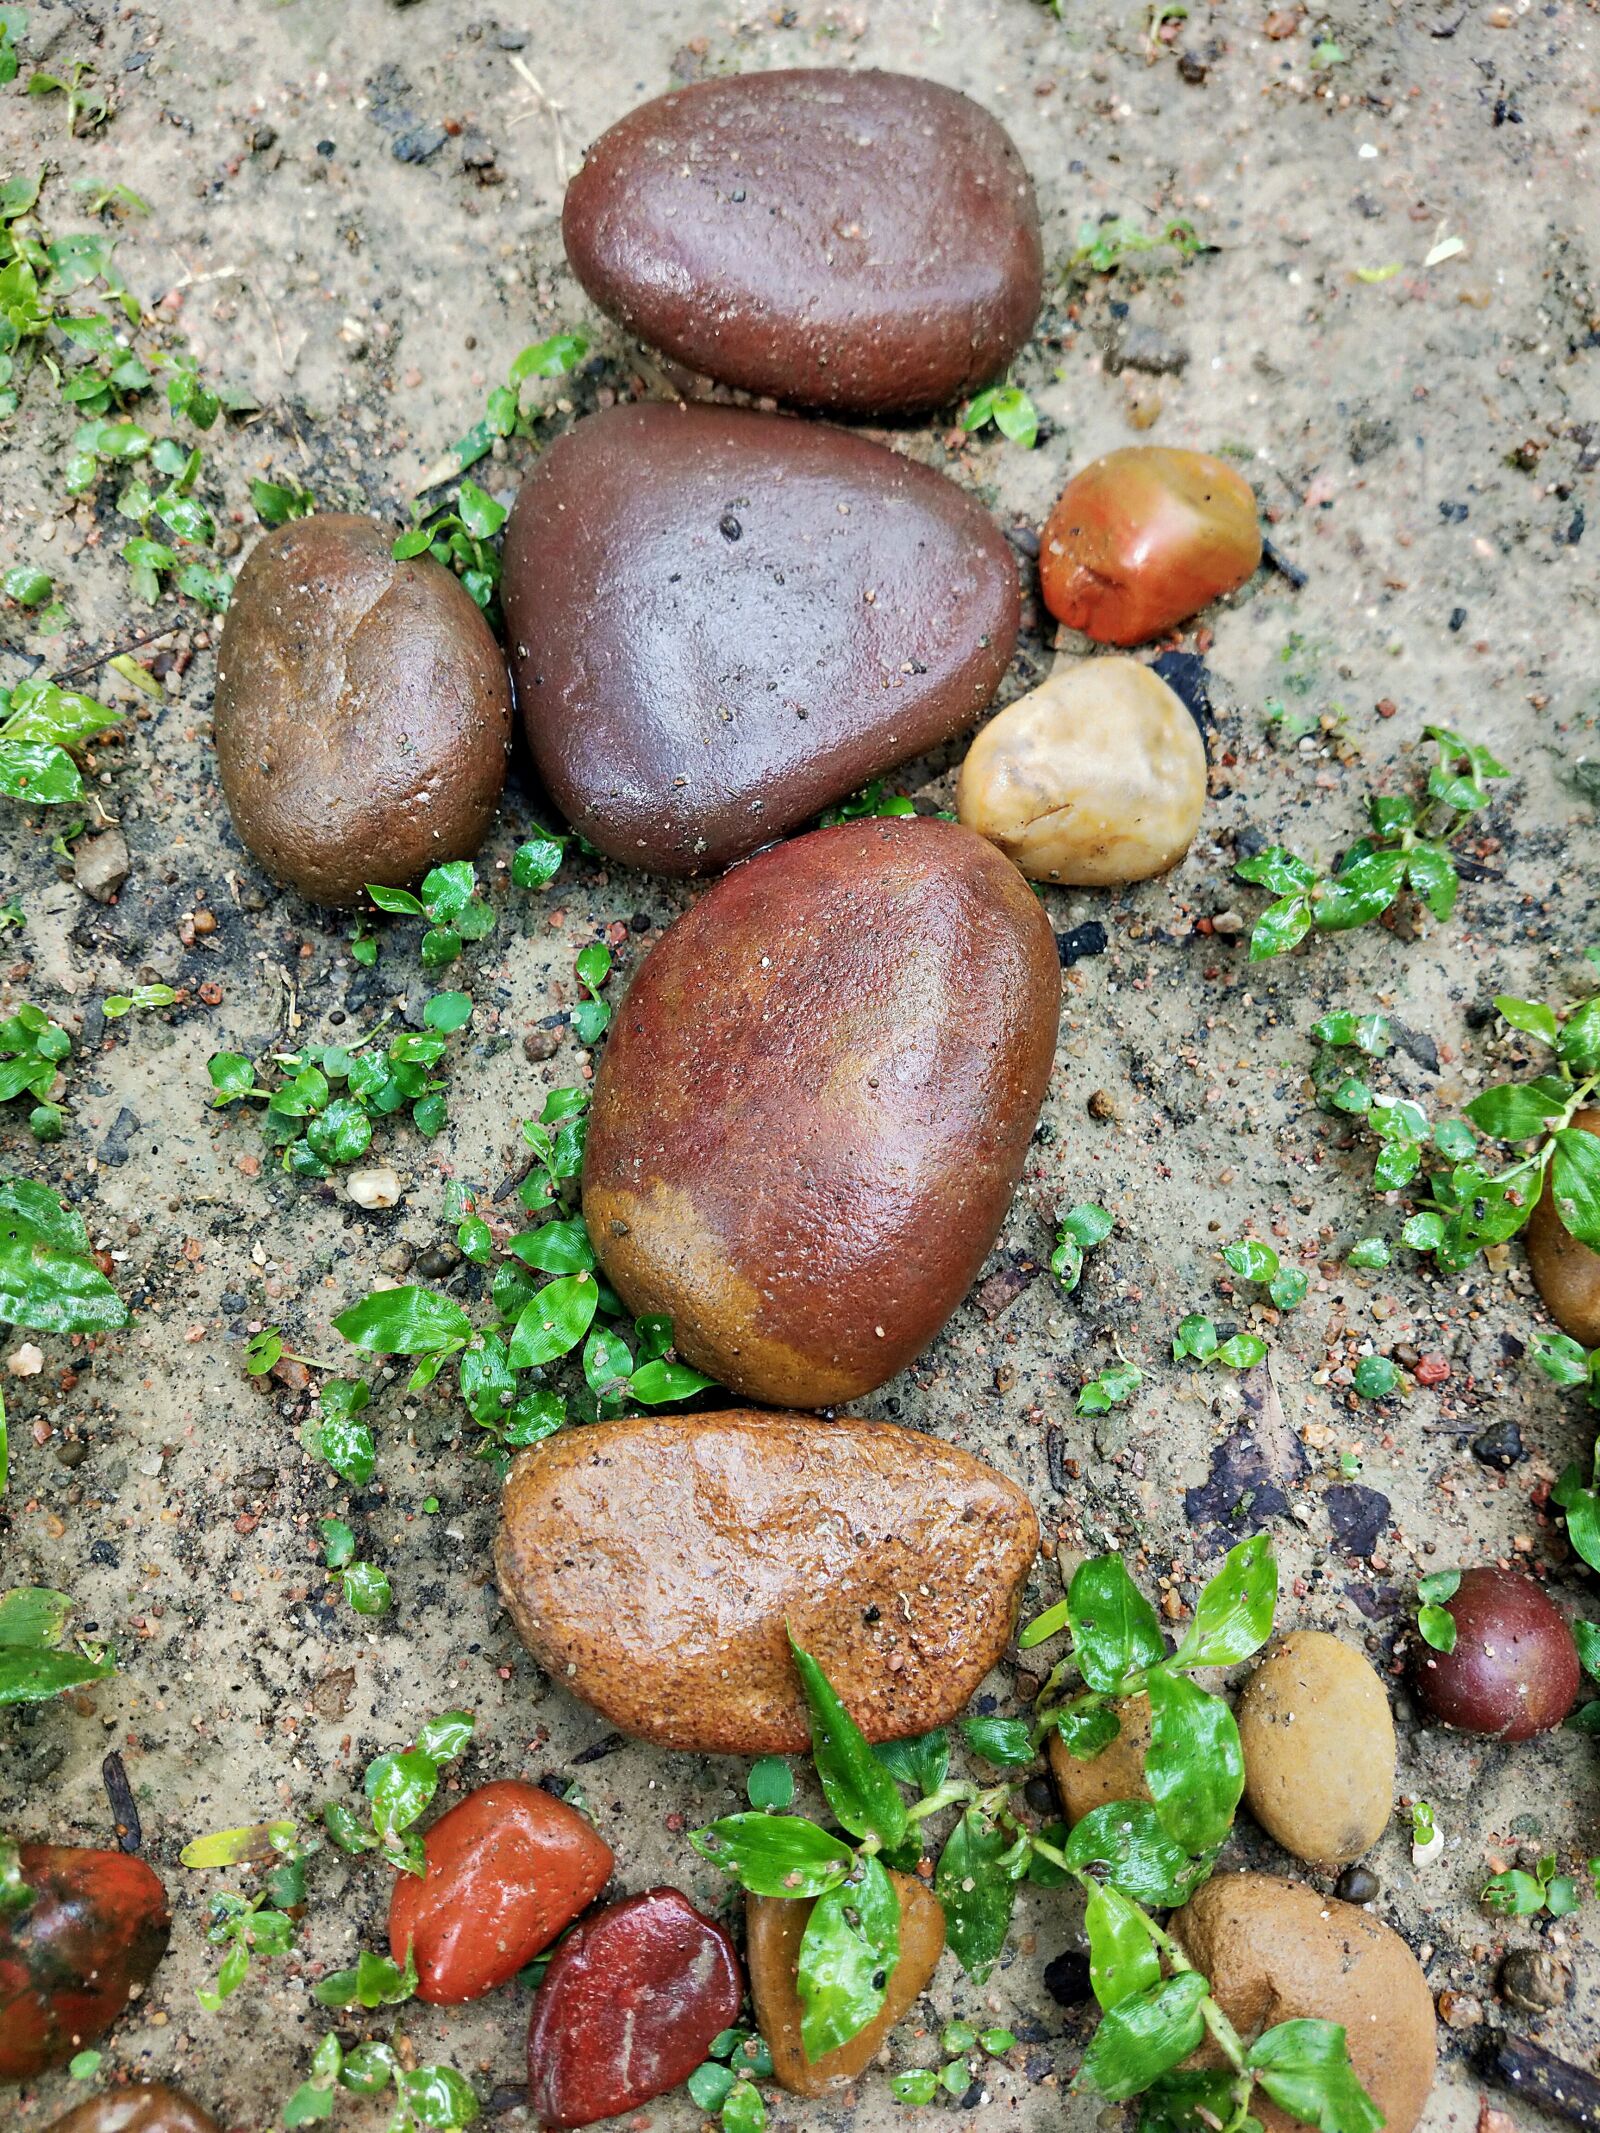 OPPO Realme 2 Pro sample photo. Nature, rock, natural photography